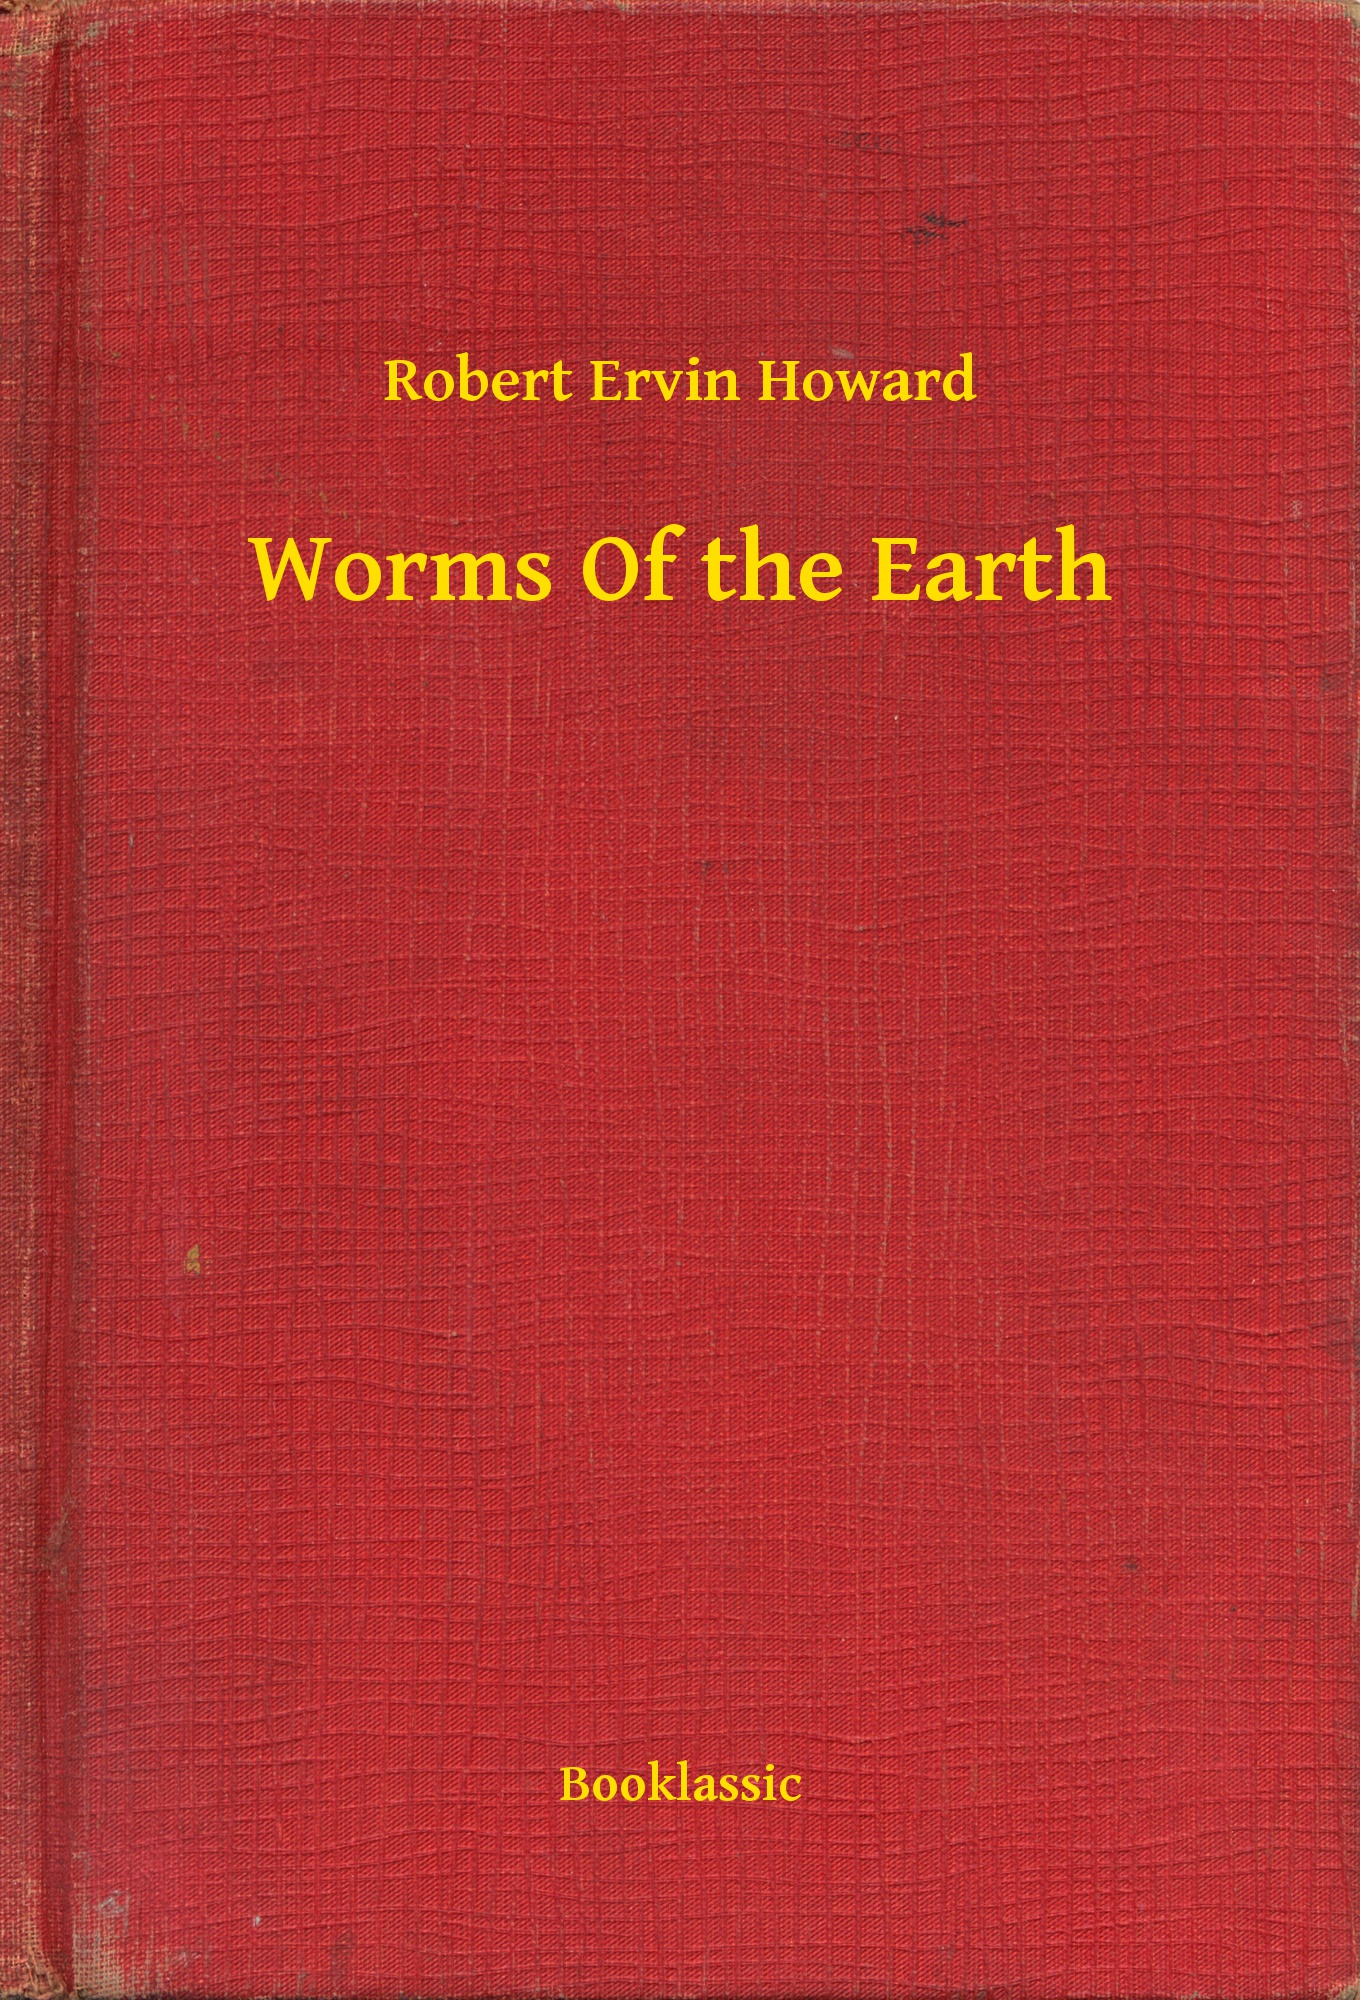 Worms Of the Earth